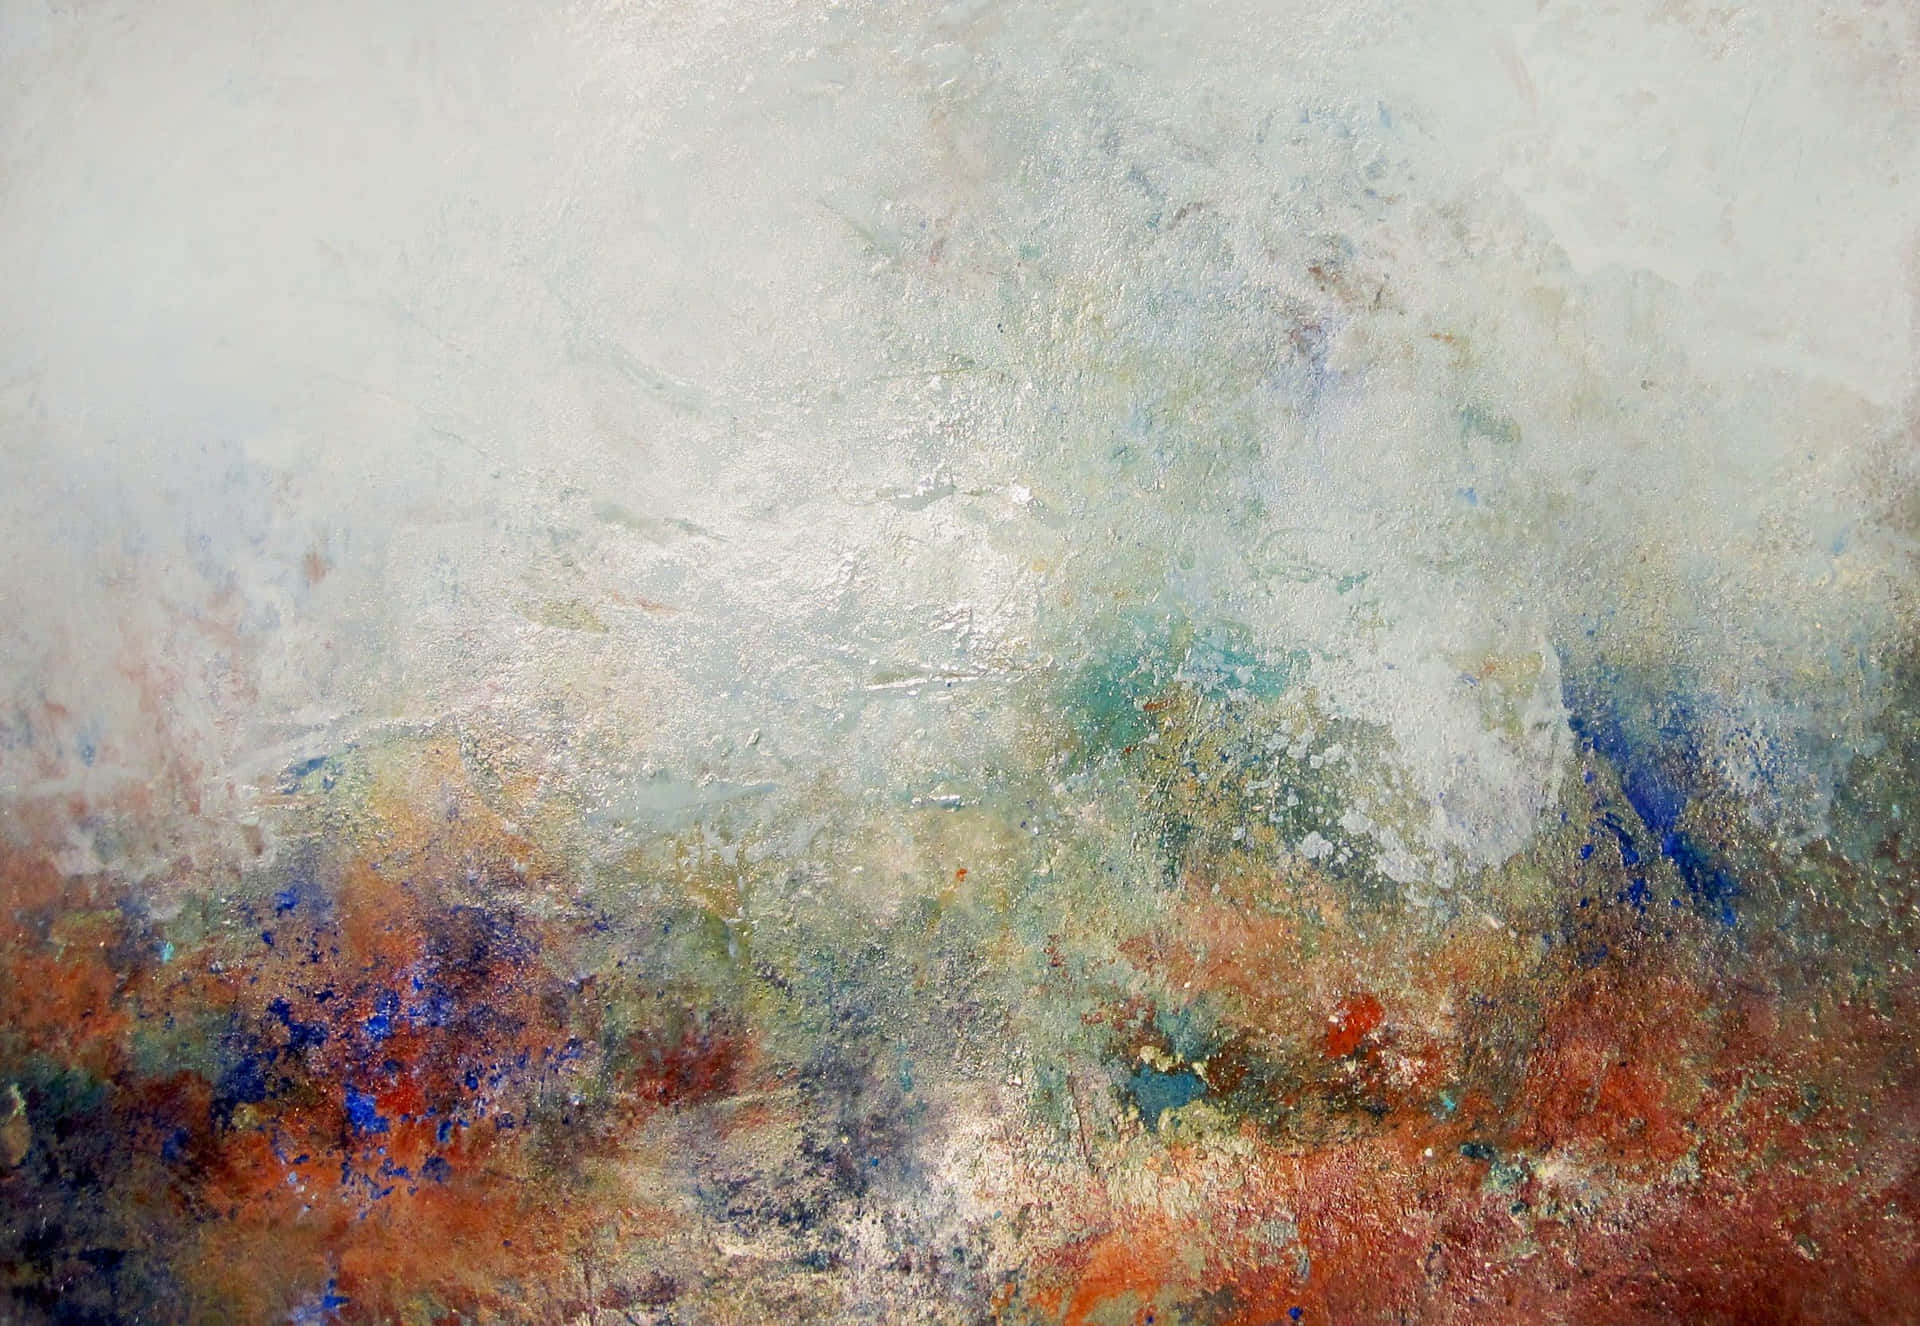 "Intricate and dynamic, this mesmerizing contemporary art painting stirs the soul" Wallpaper